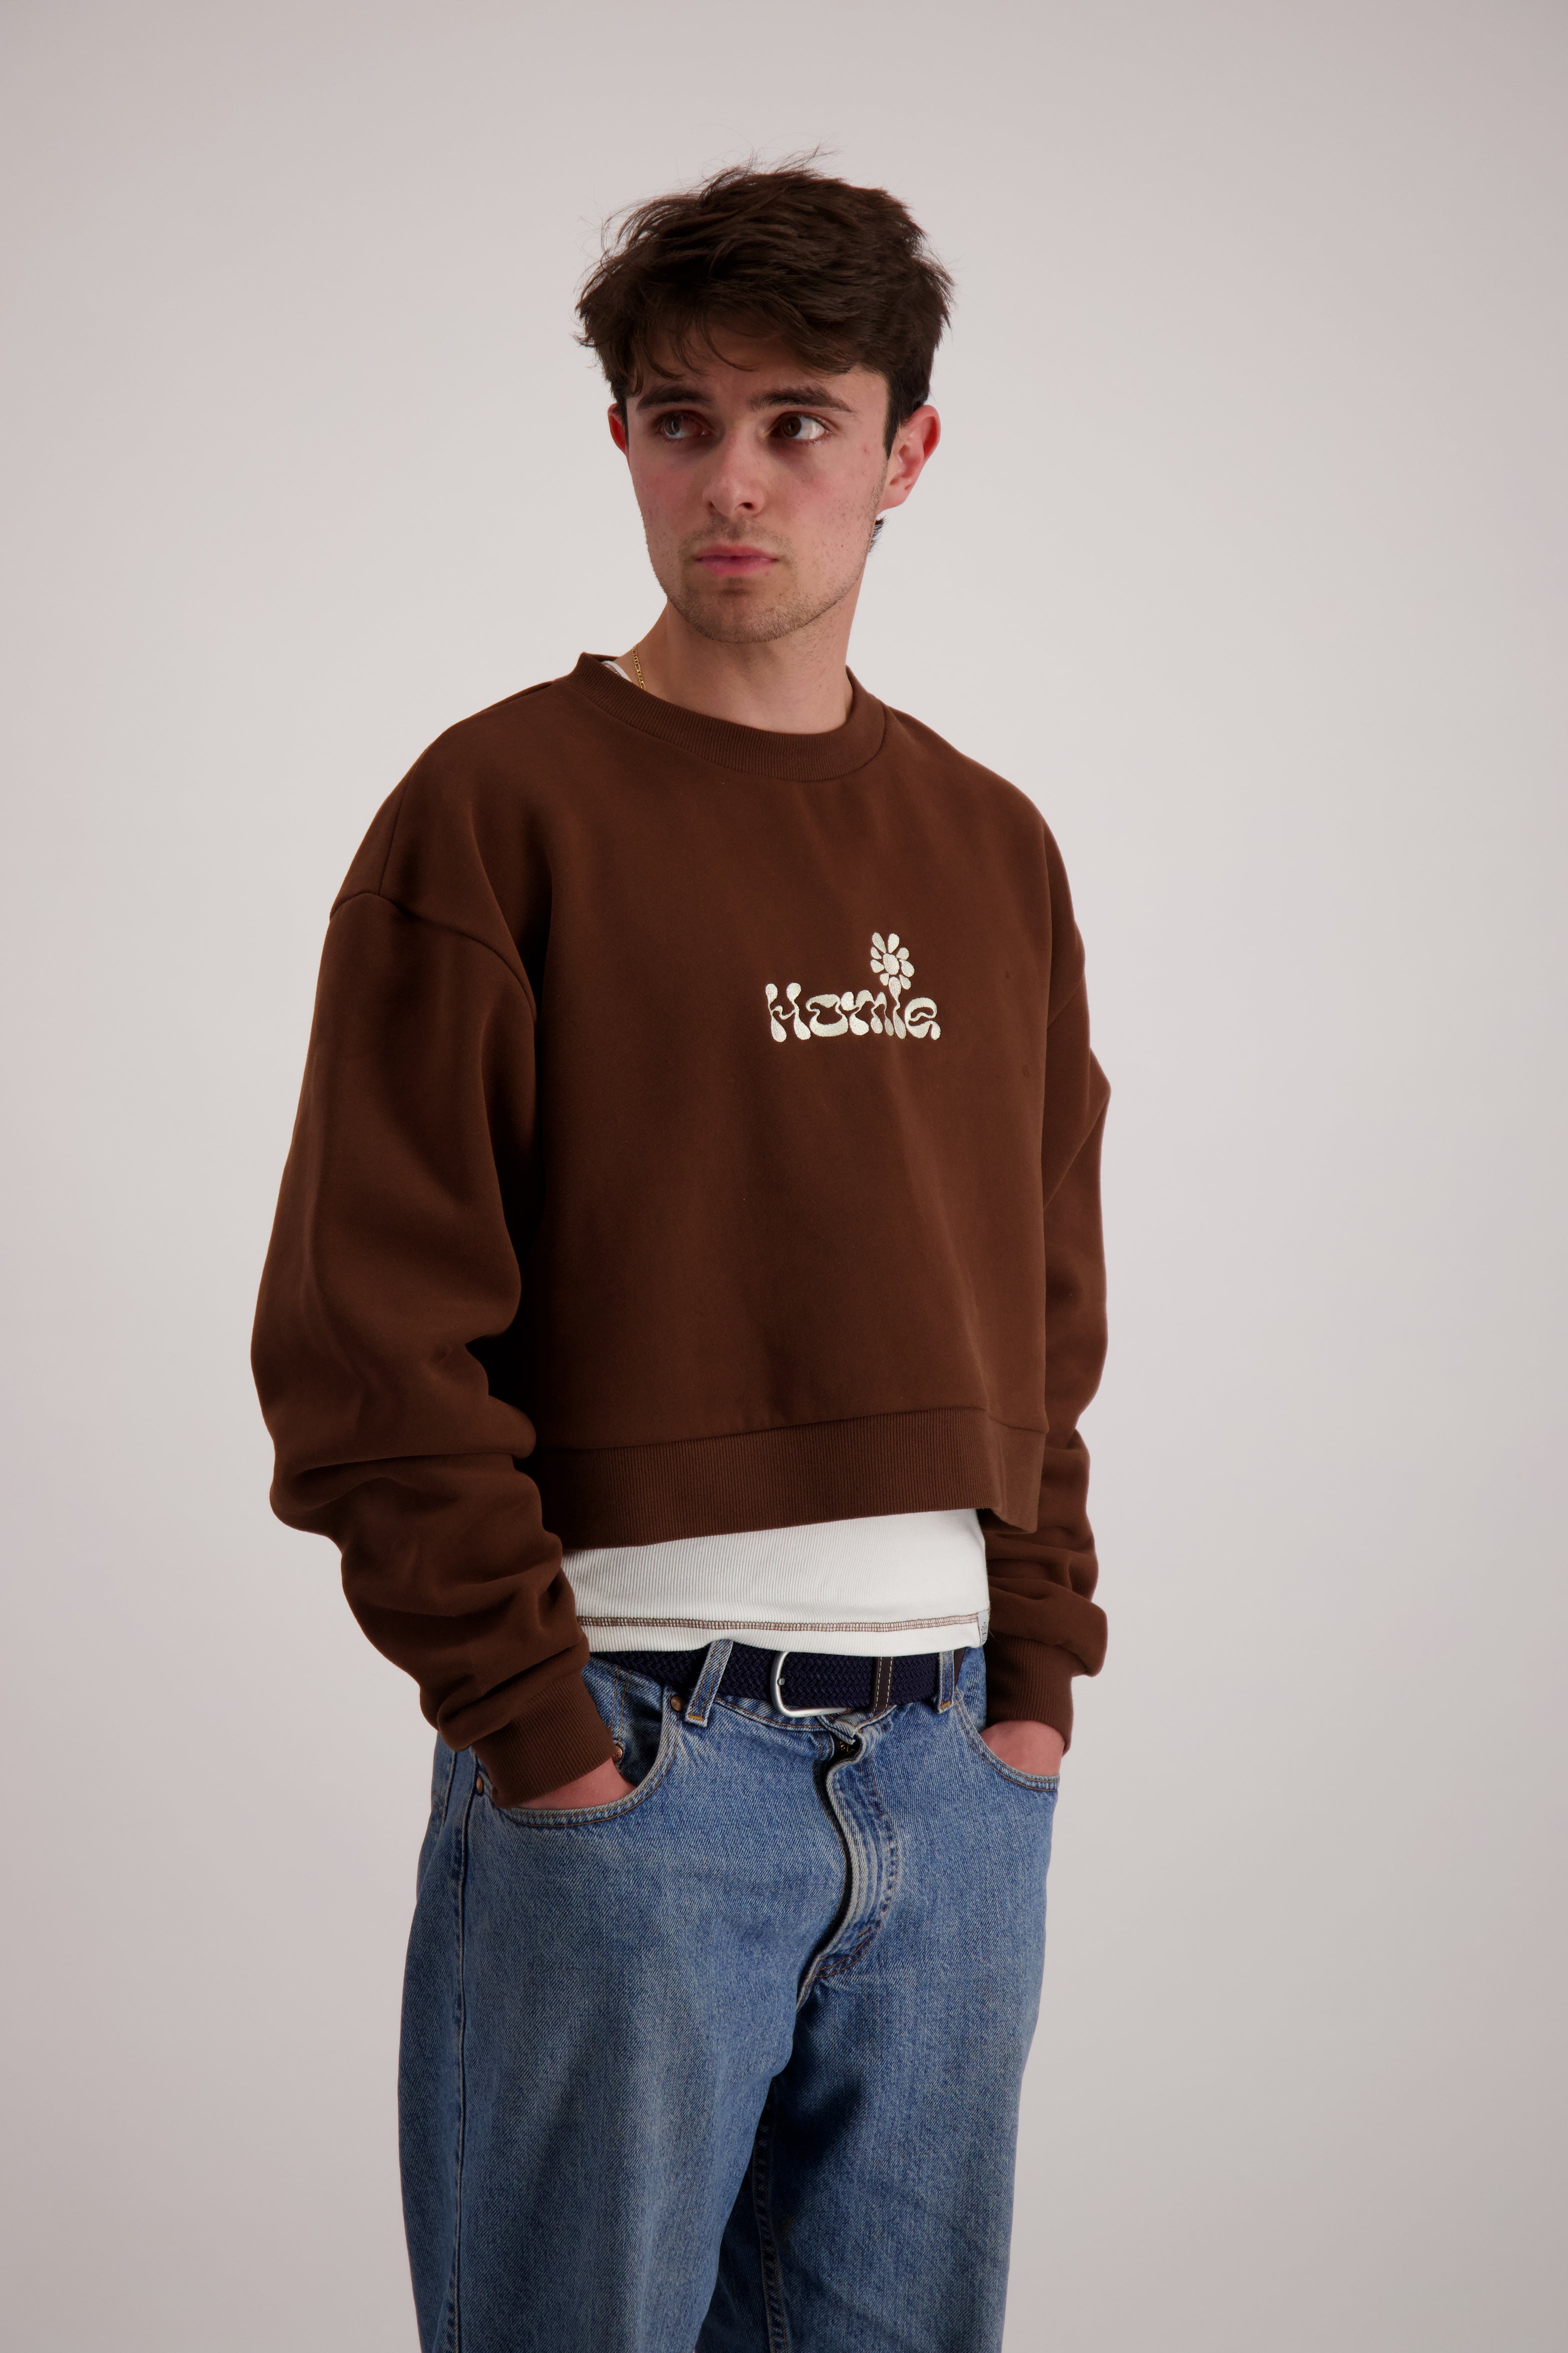 HoMie Cropped Crew – Chocolate